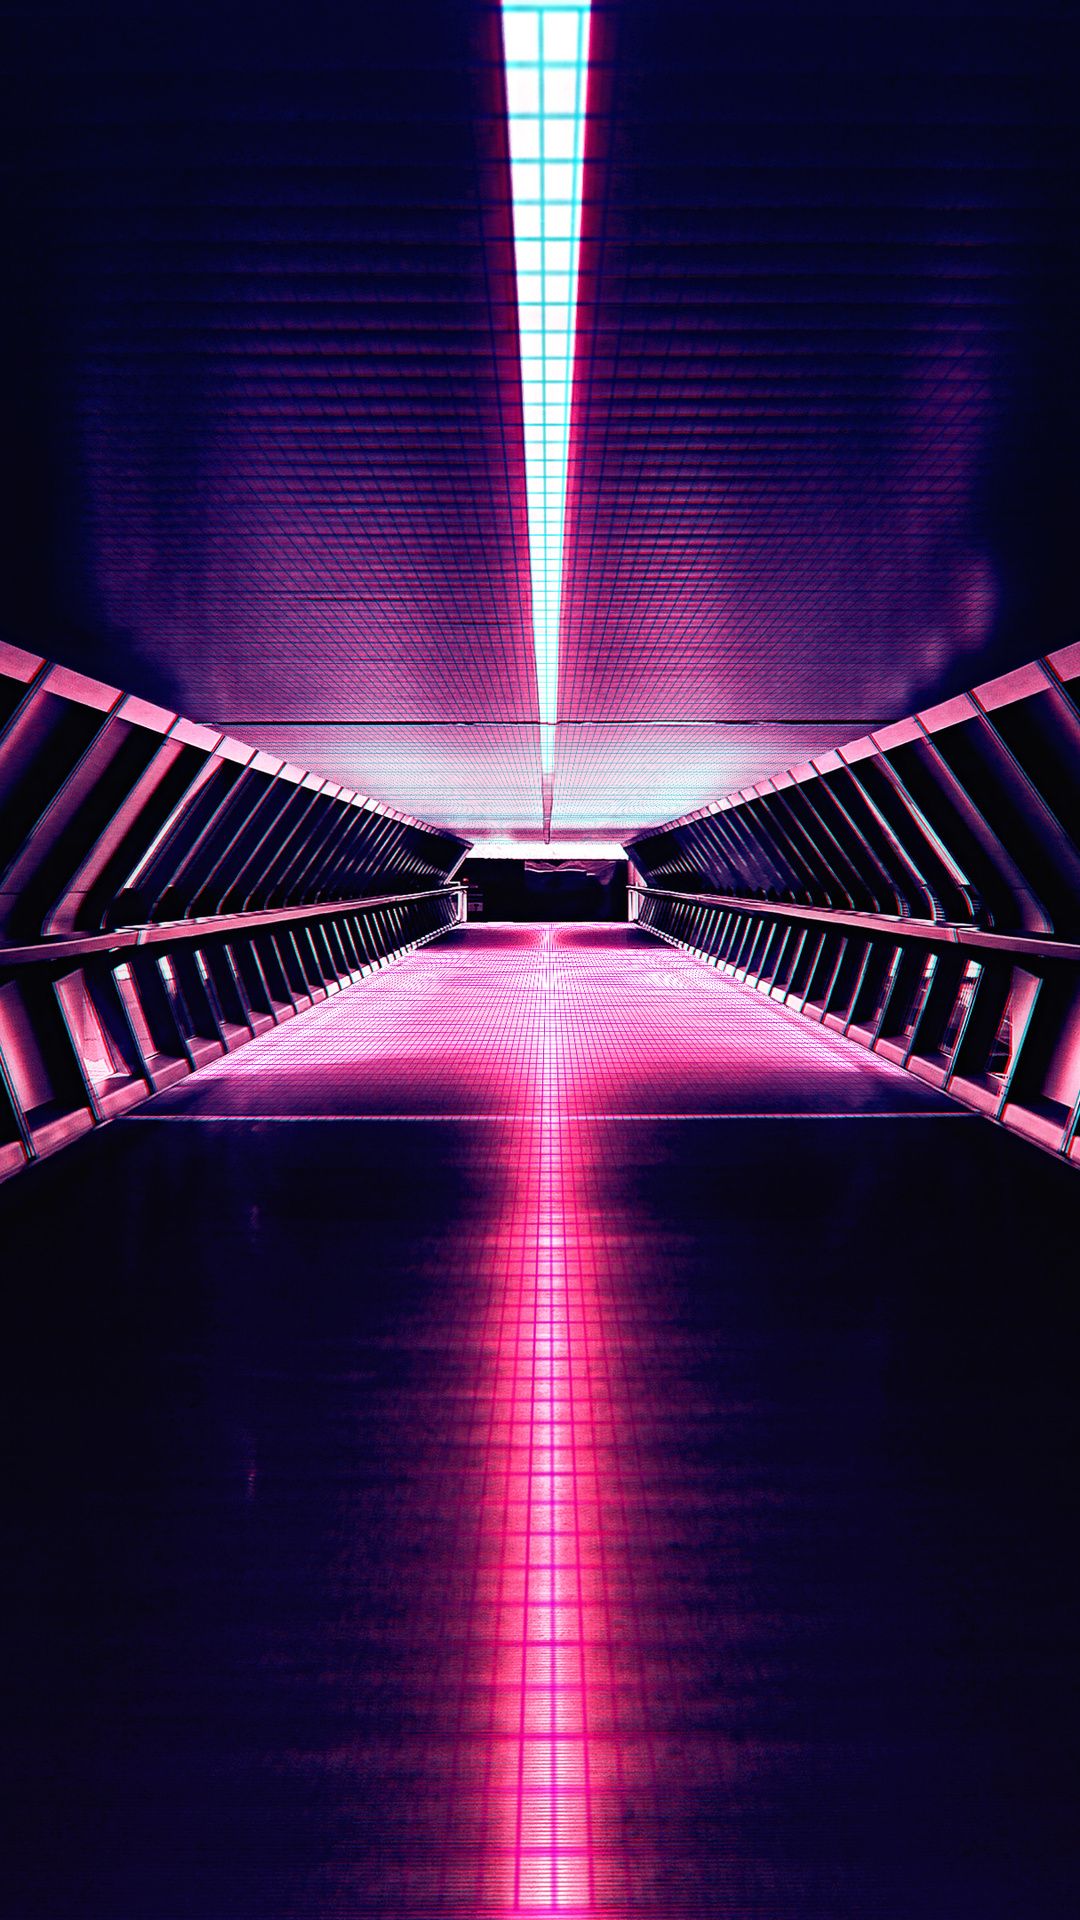 Synthwave Aesthetic Corridor 4k iPhone 6s, 6 Plus, Pixel xl , One Plus 3t, 5 HD 4k Wallpaper, Image, Background, Photo and Picture